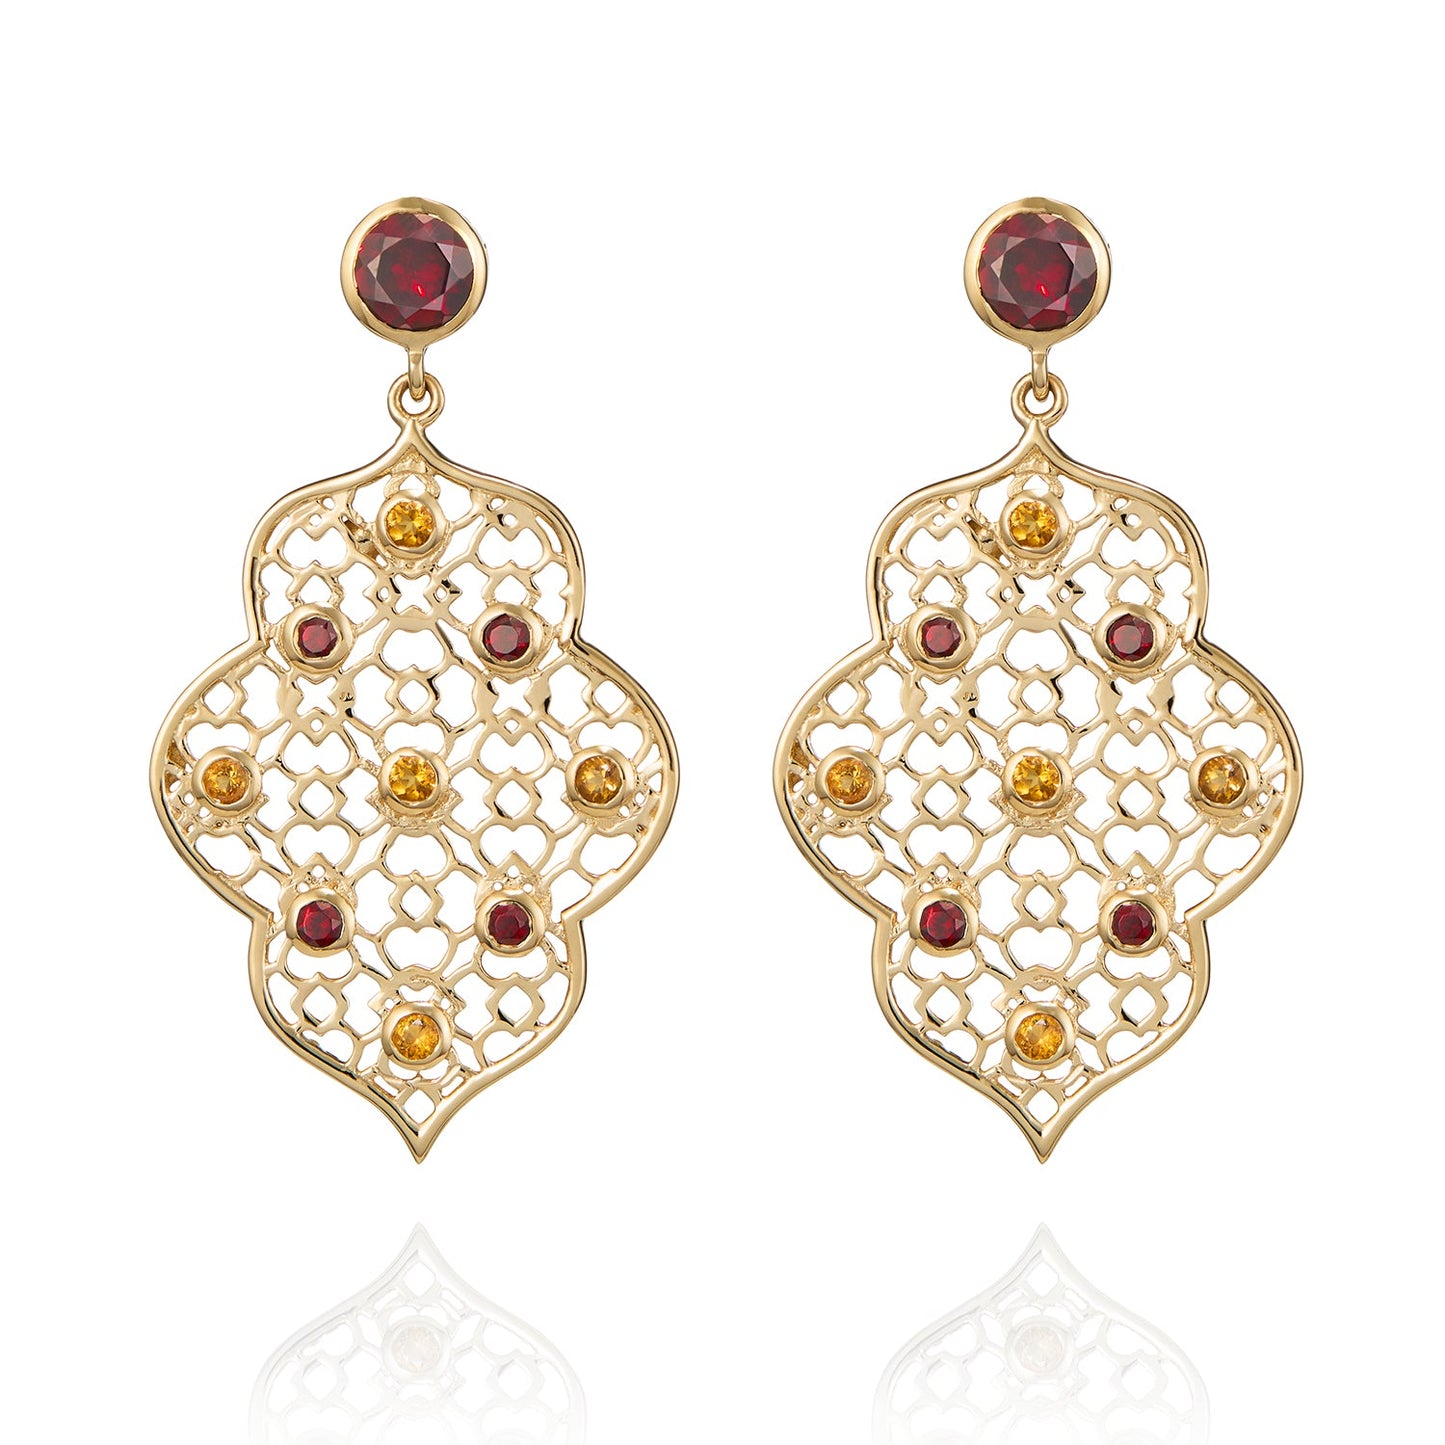 Gold Filigree Earrings in Garnet & Citrine | The Andalusian Collection | Augustine Jewels